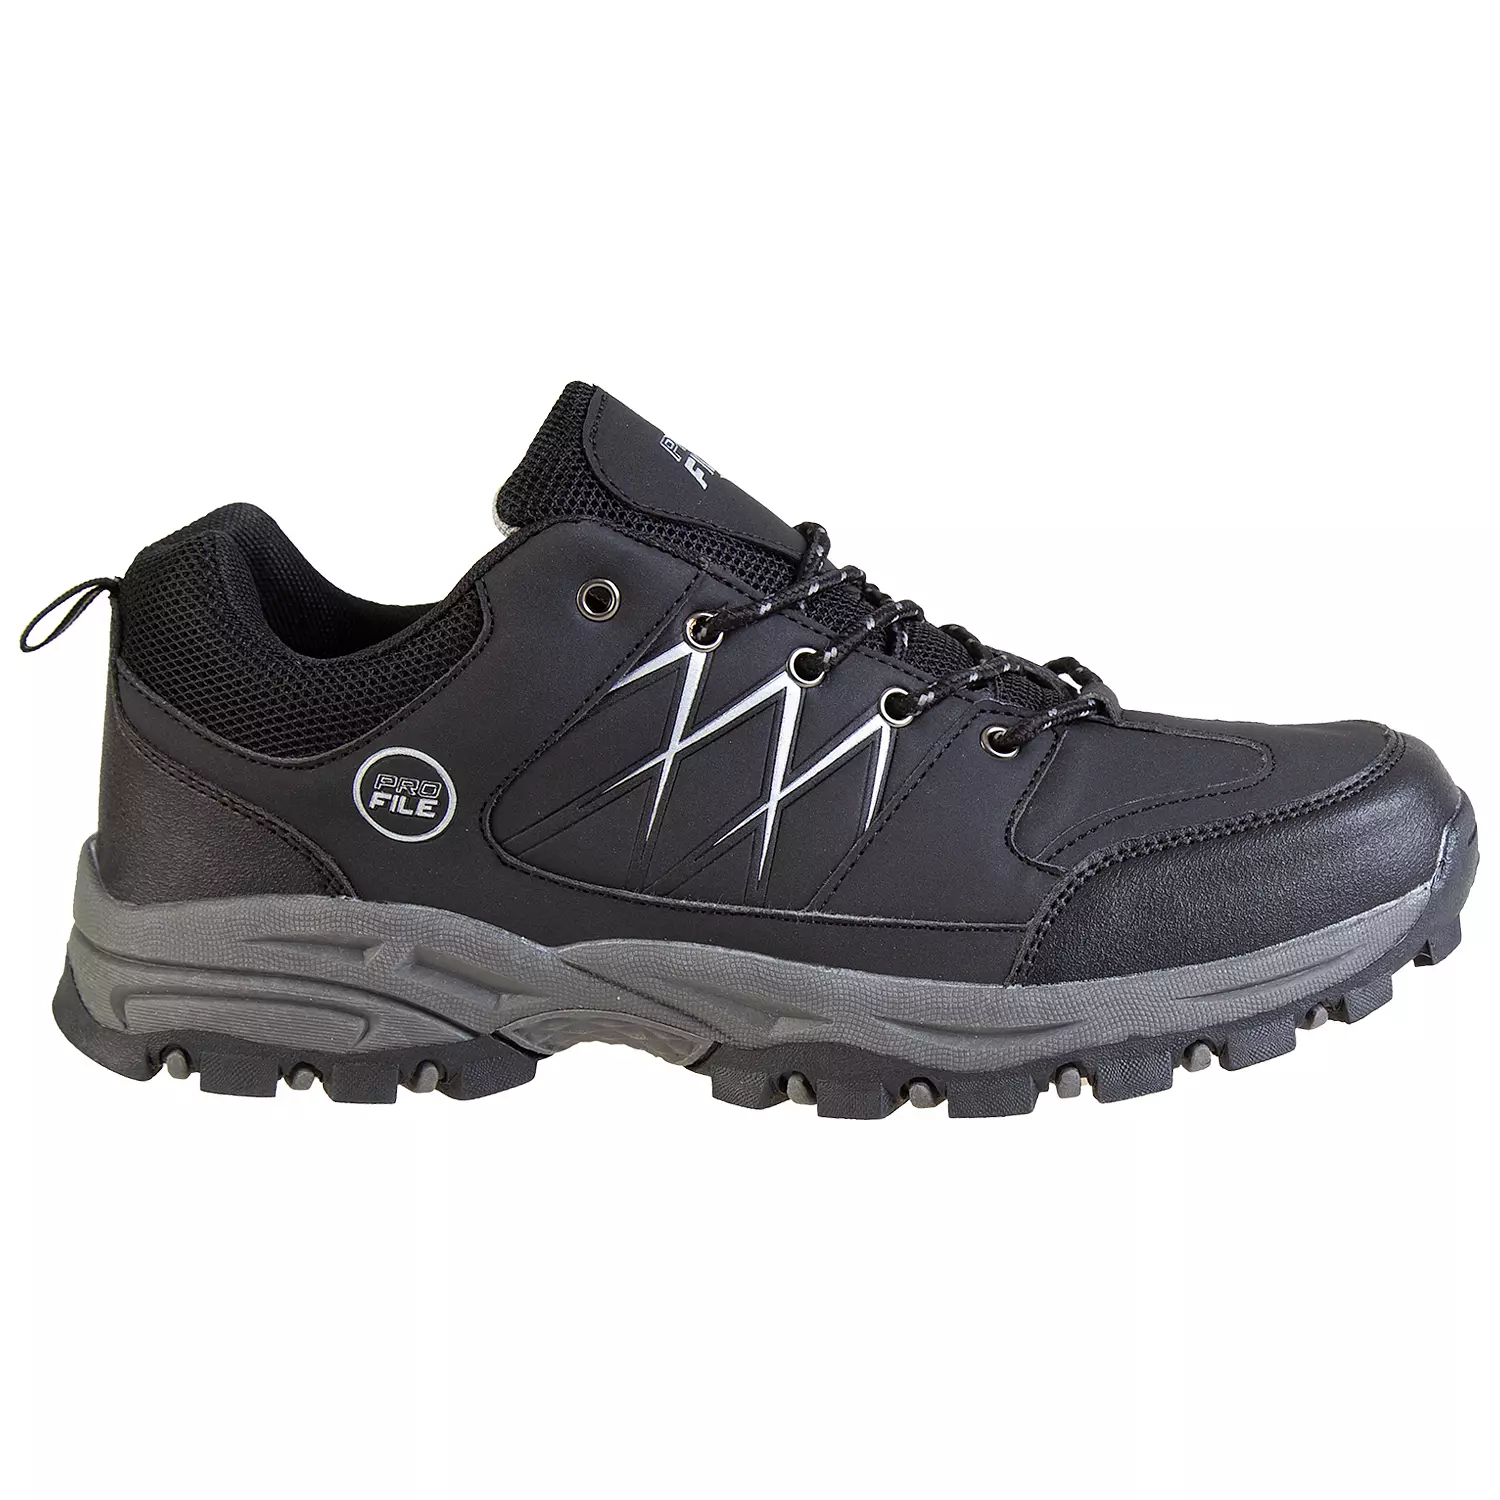 Men's low top hiking shoes with reflective strips, black, size 7